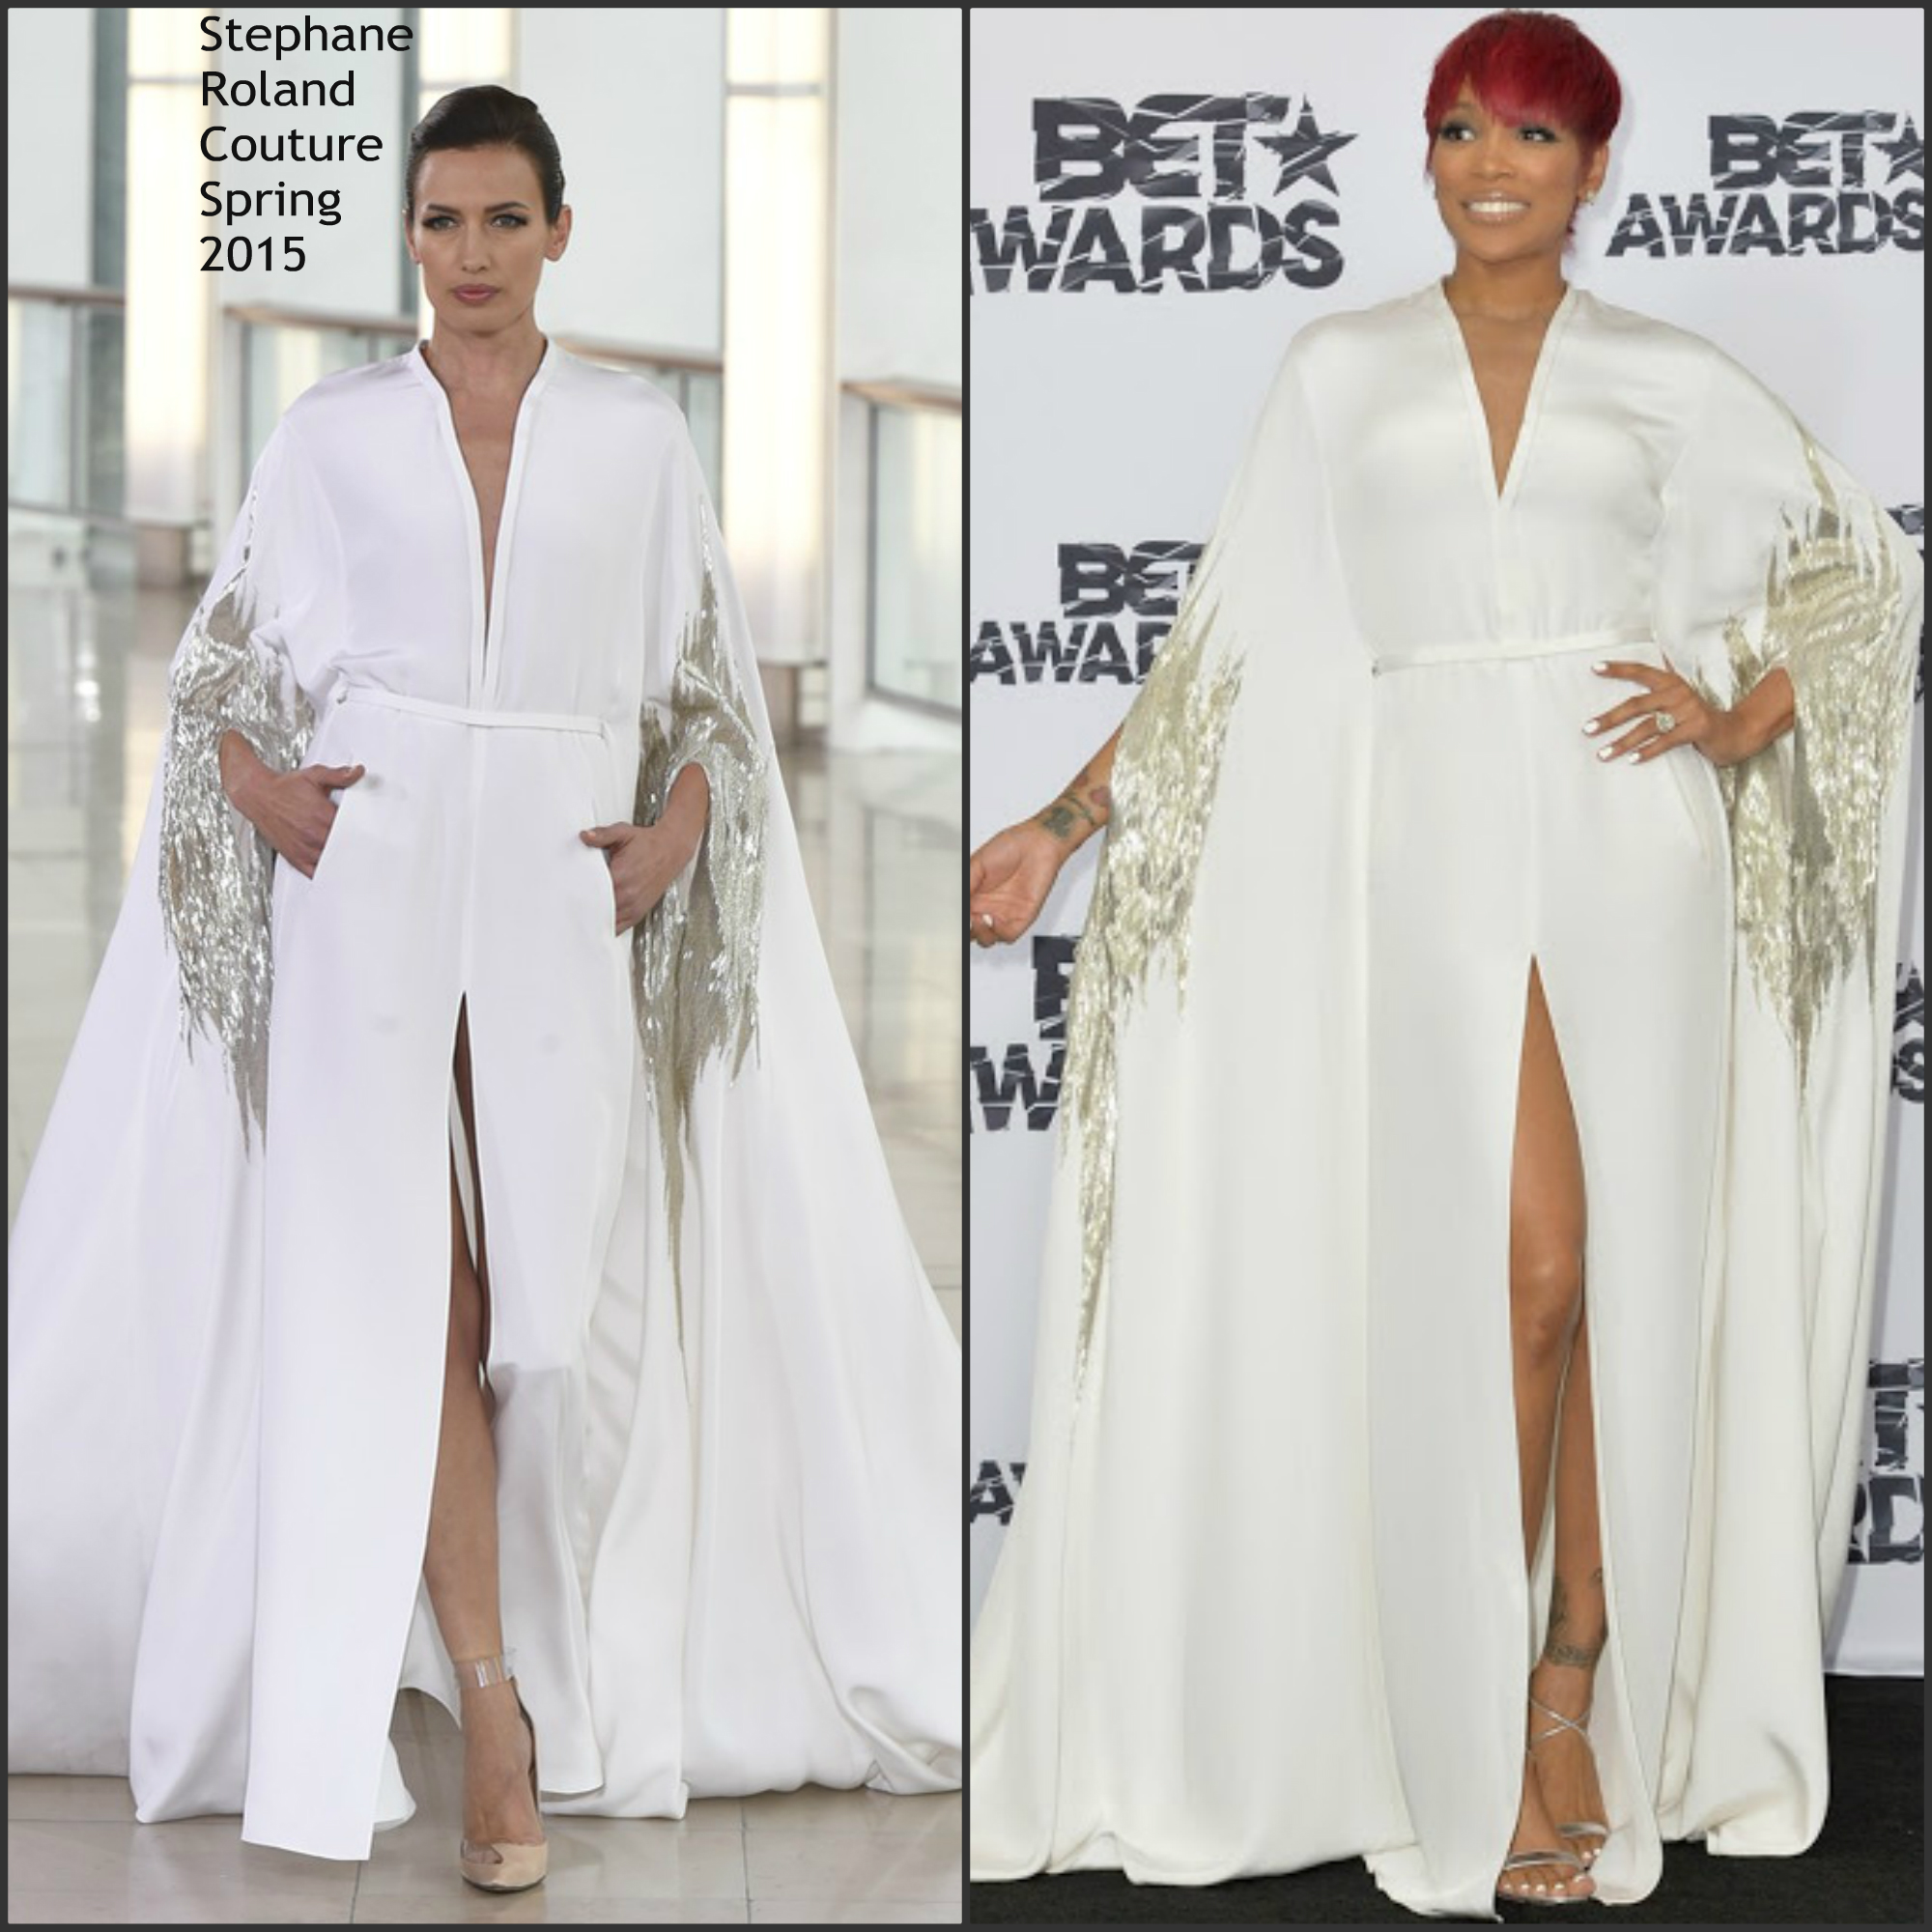 monica-brown-in-stephane-rolland-couture-2015-bet-awards